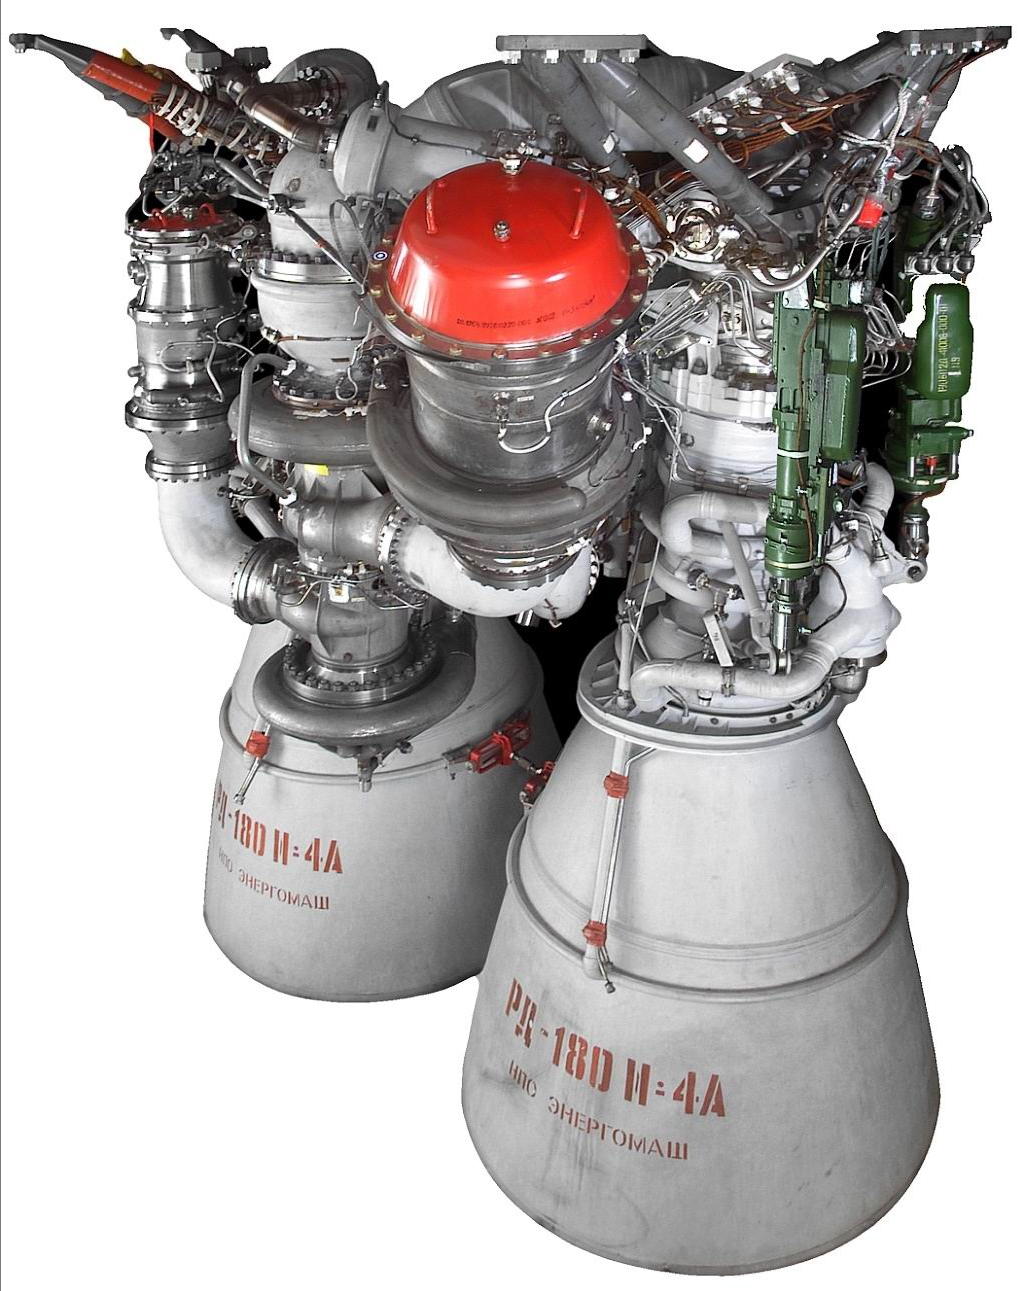 rd-180_large